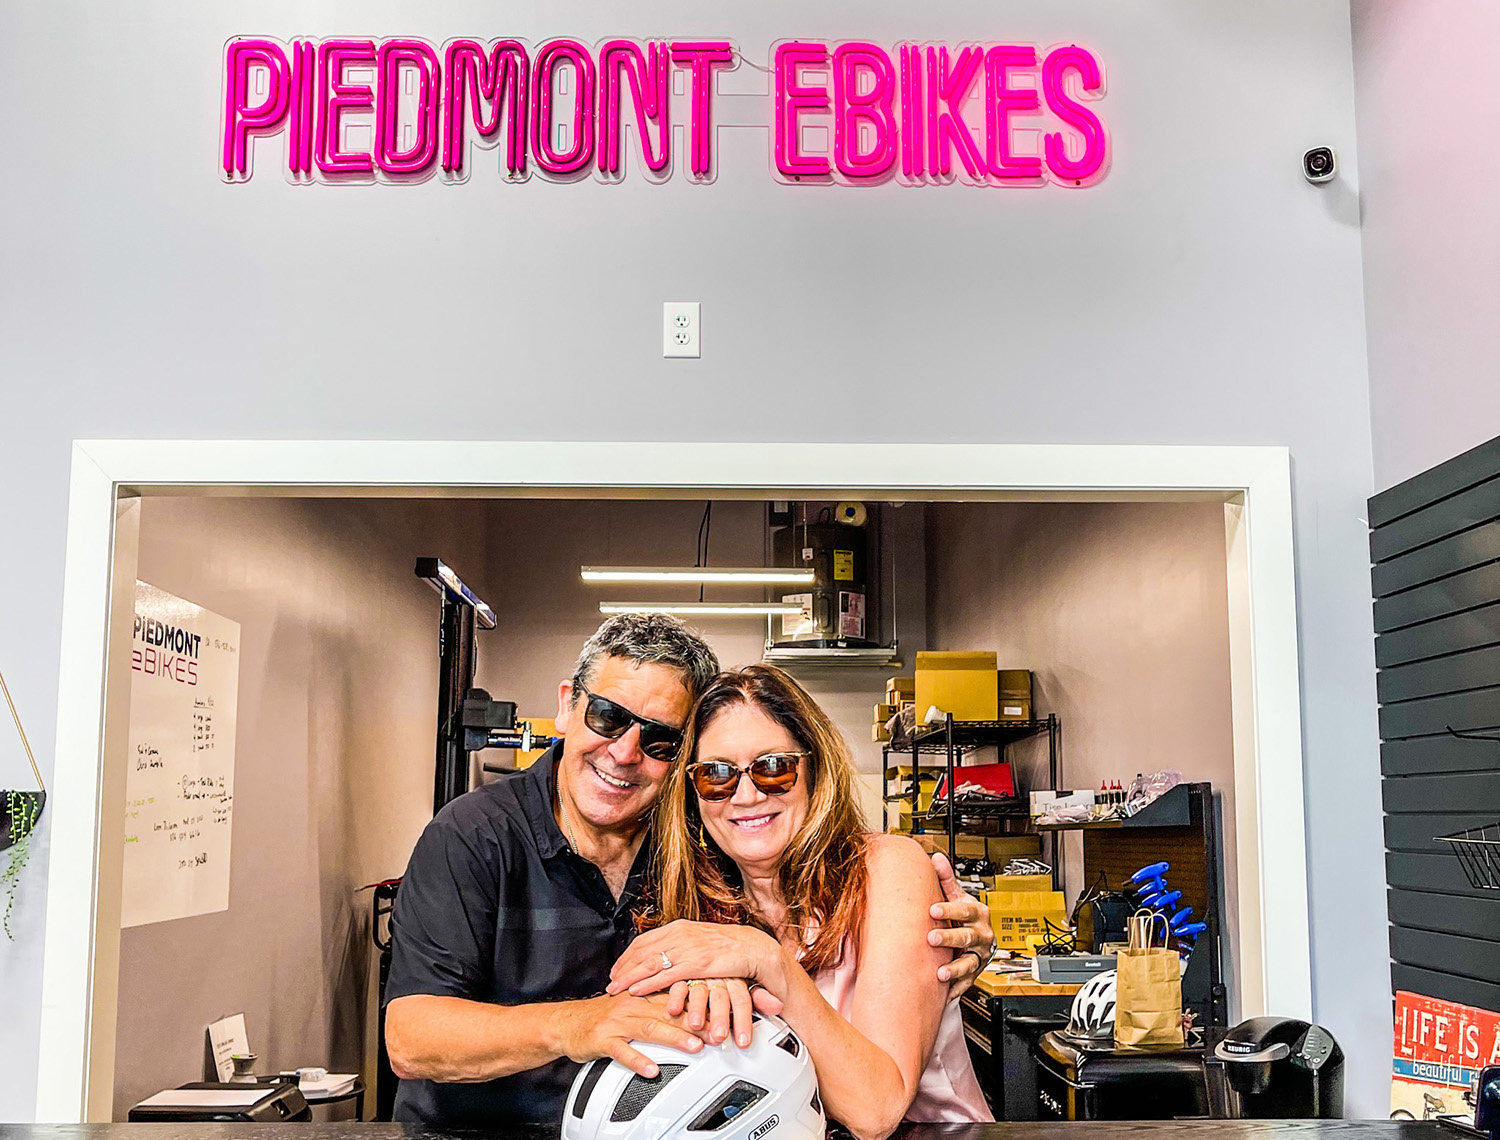 A Word from Frank, Piedmont eBikes Founder/Owner